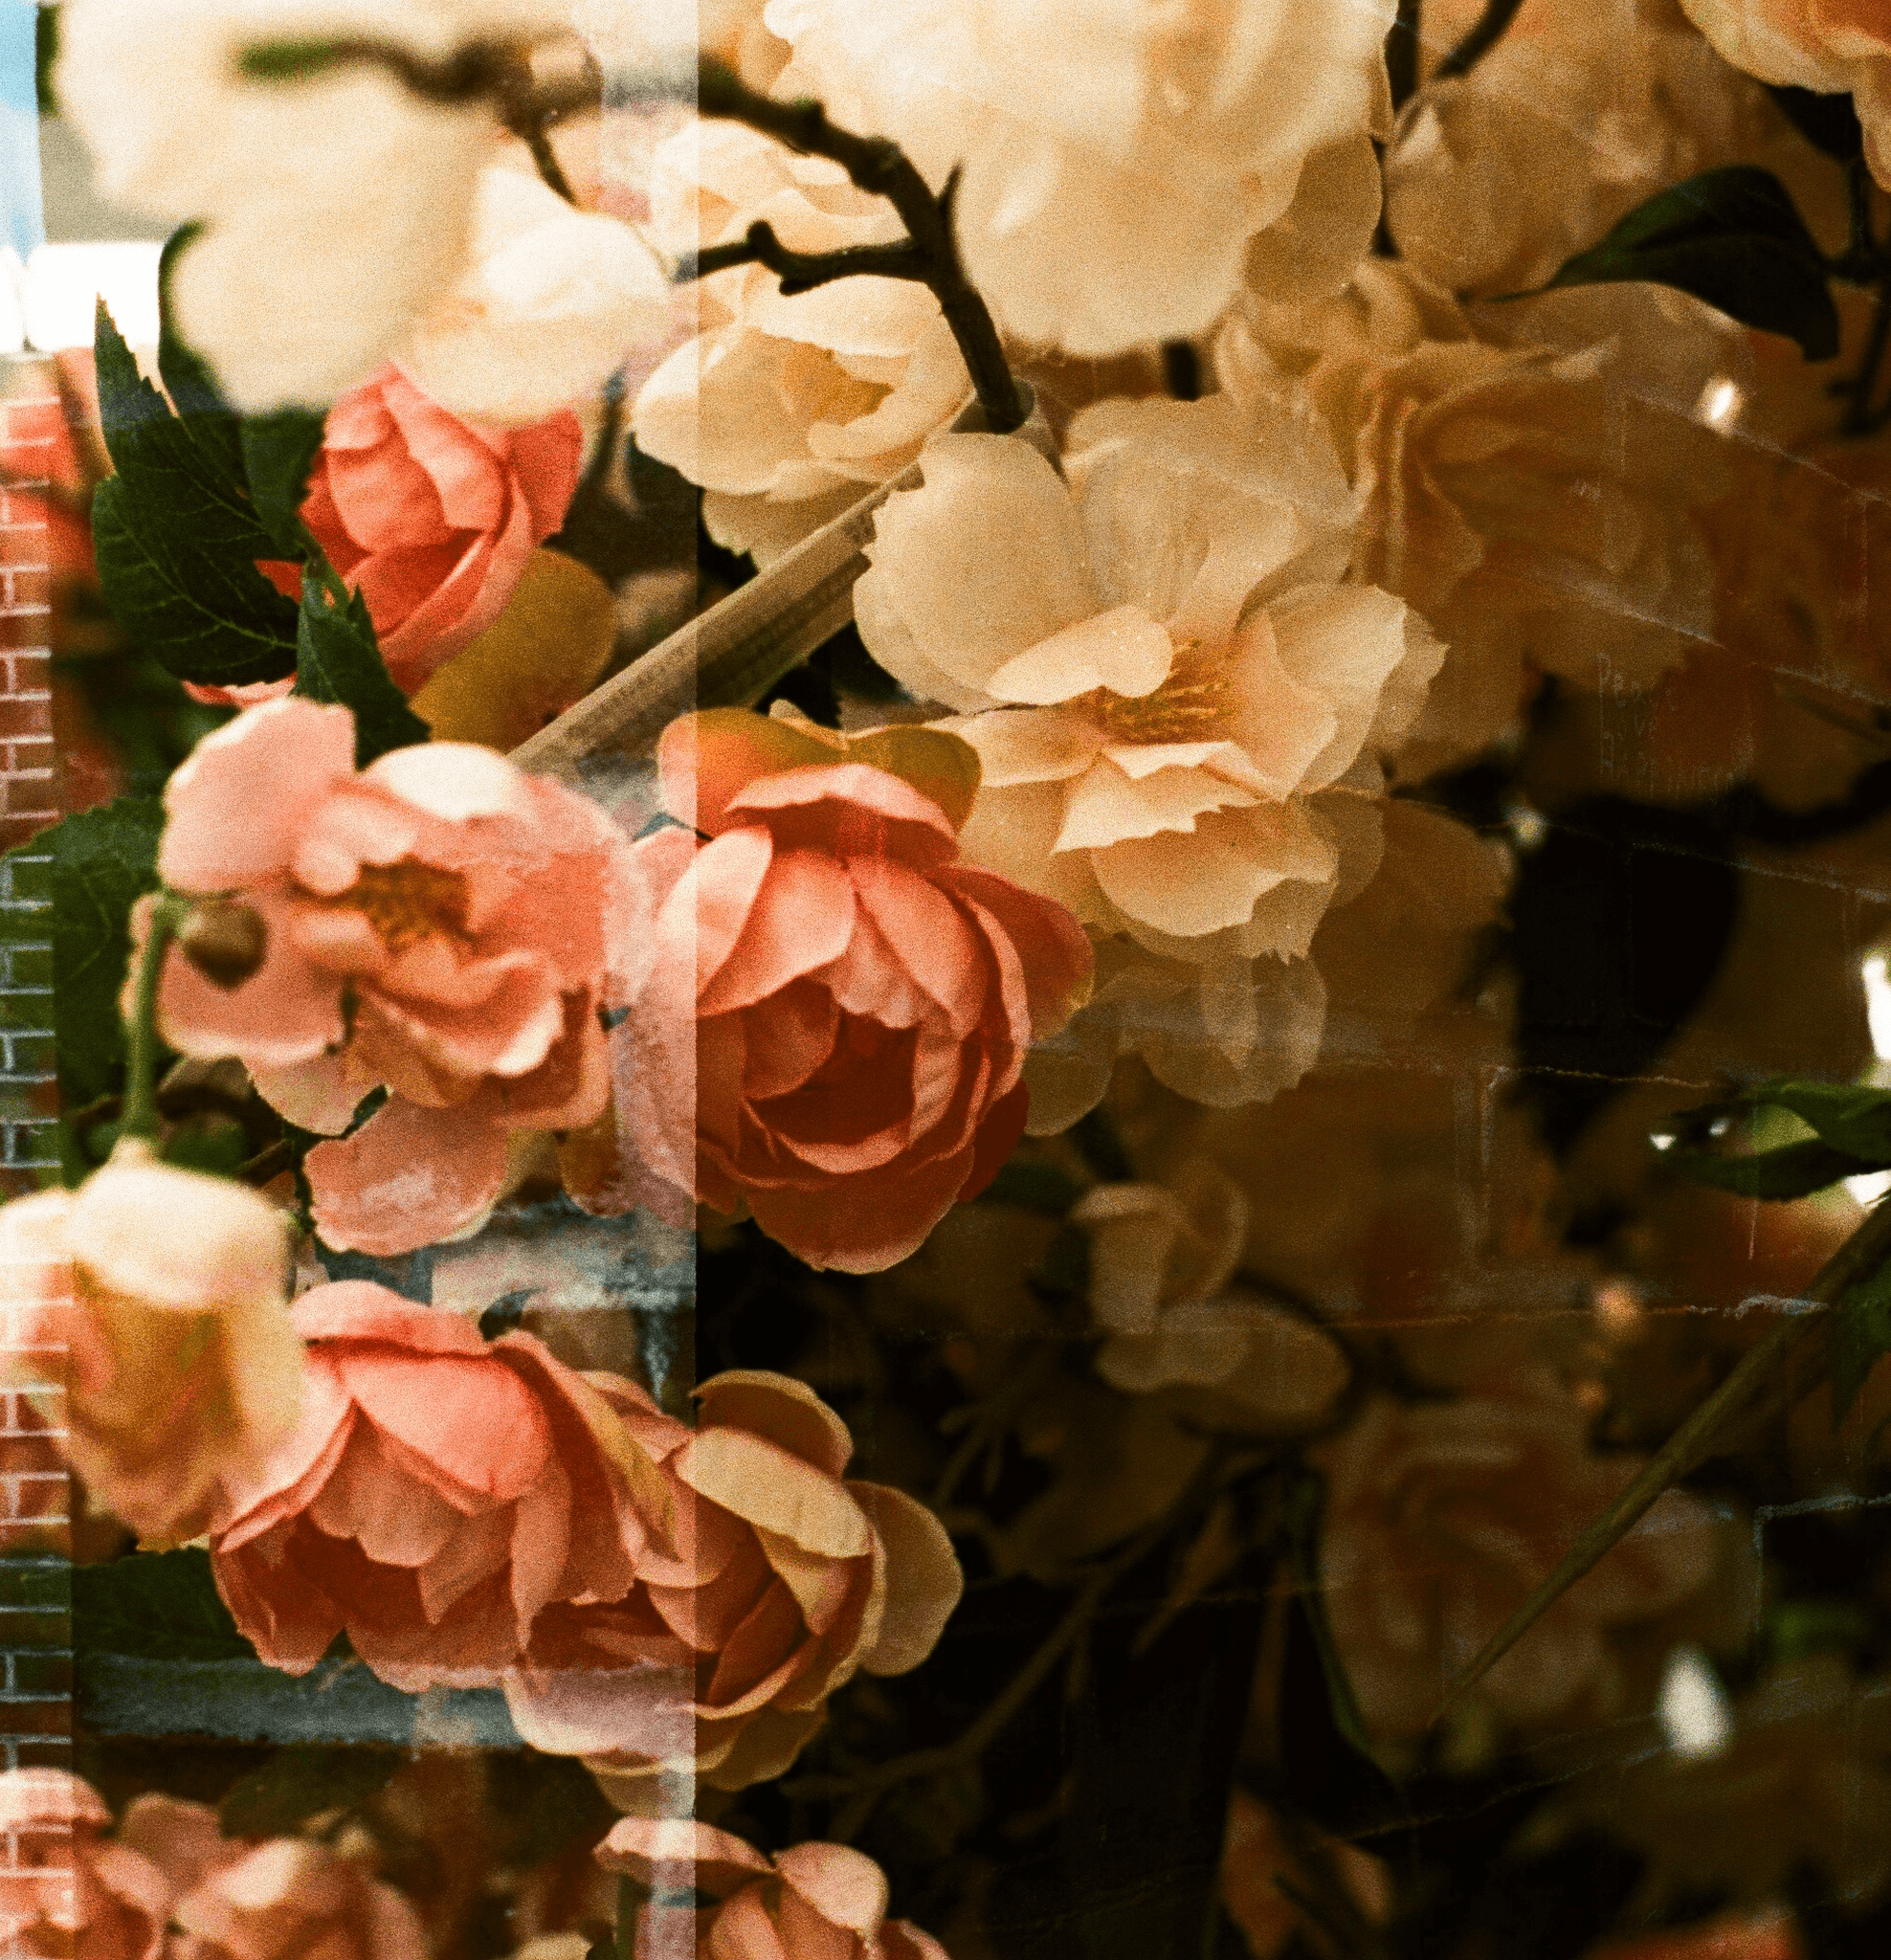 pink and white. 35mm film.